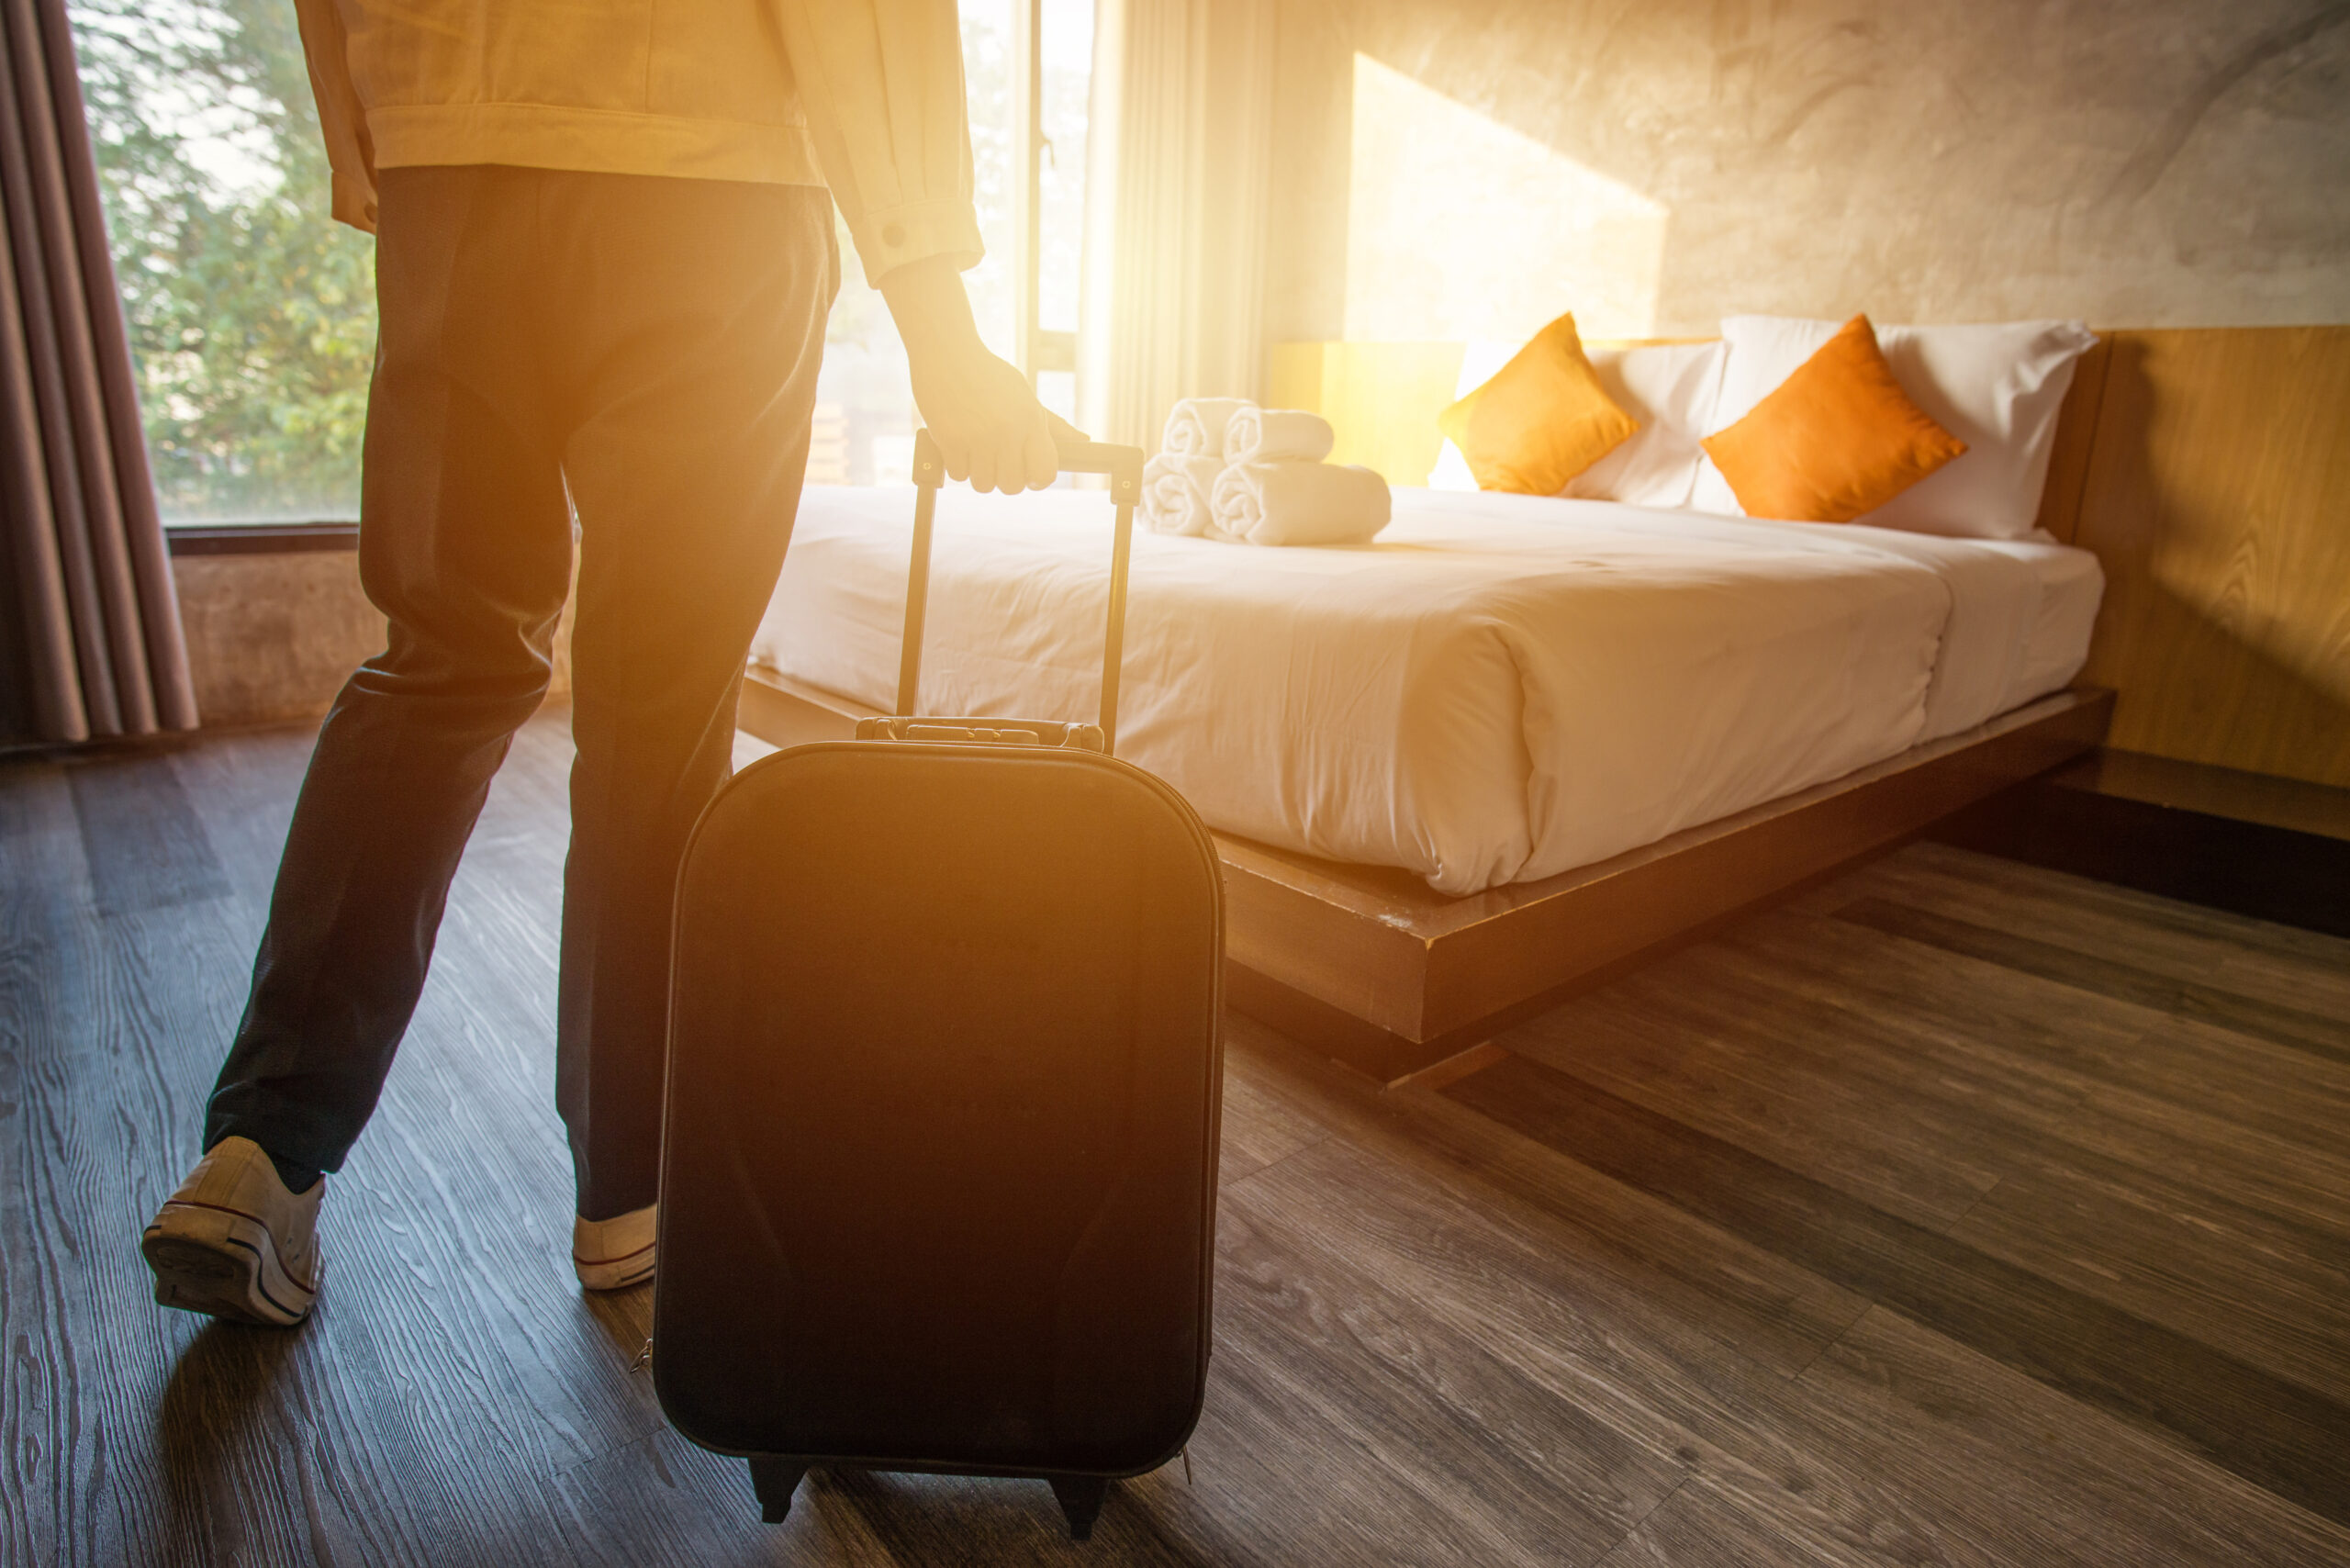 A traveler holding a roller suitcase in a hotel room.